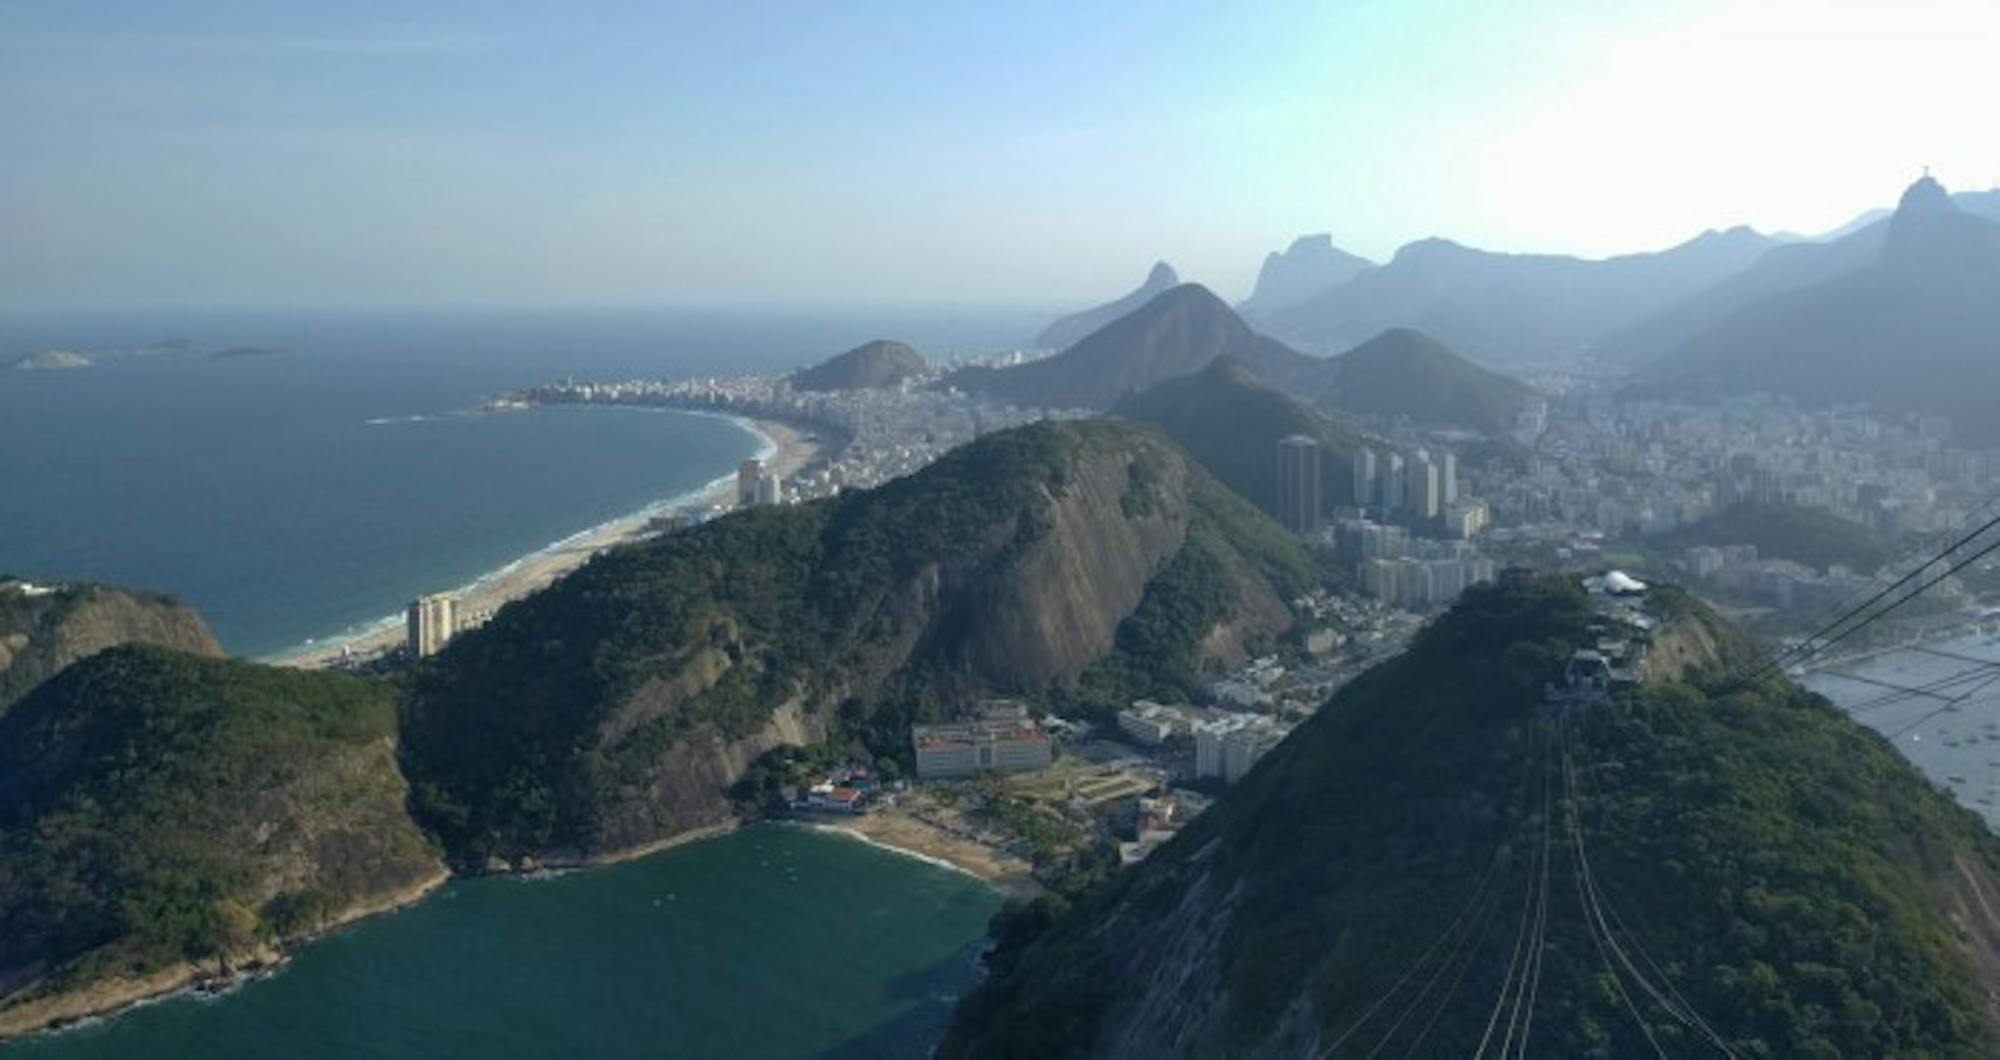 A view of the Rio de Janeiro landscape during the 2016 Summer Olympics. Notre Dame students took advantage of the opportunity to work, conduct research and watch world-class athletes at the Games.